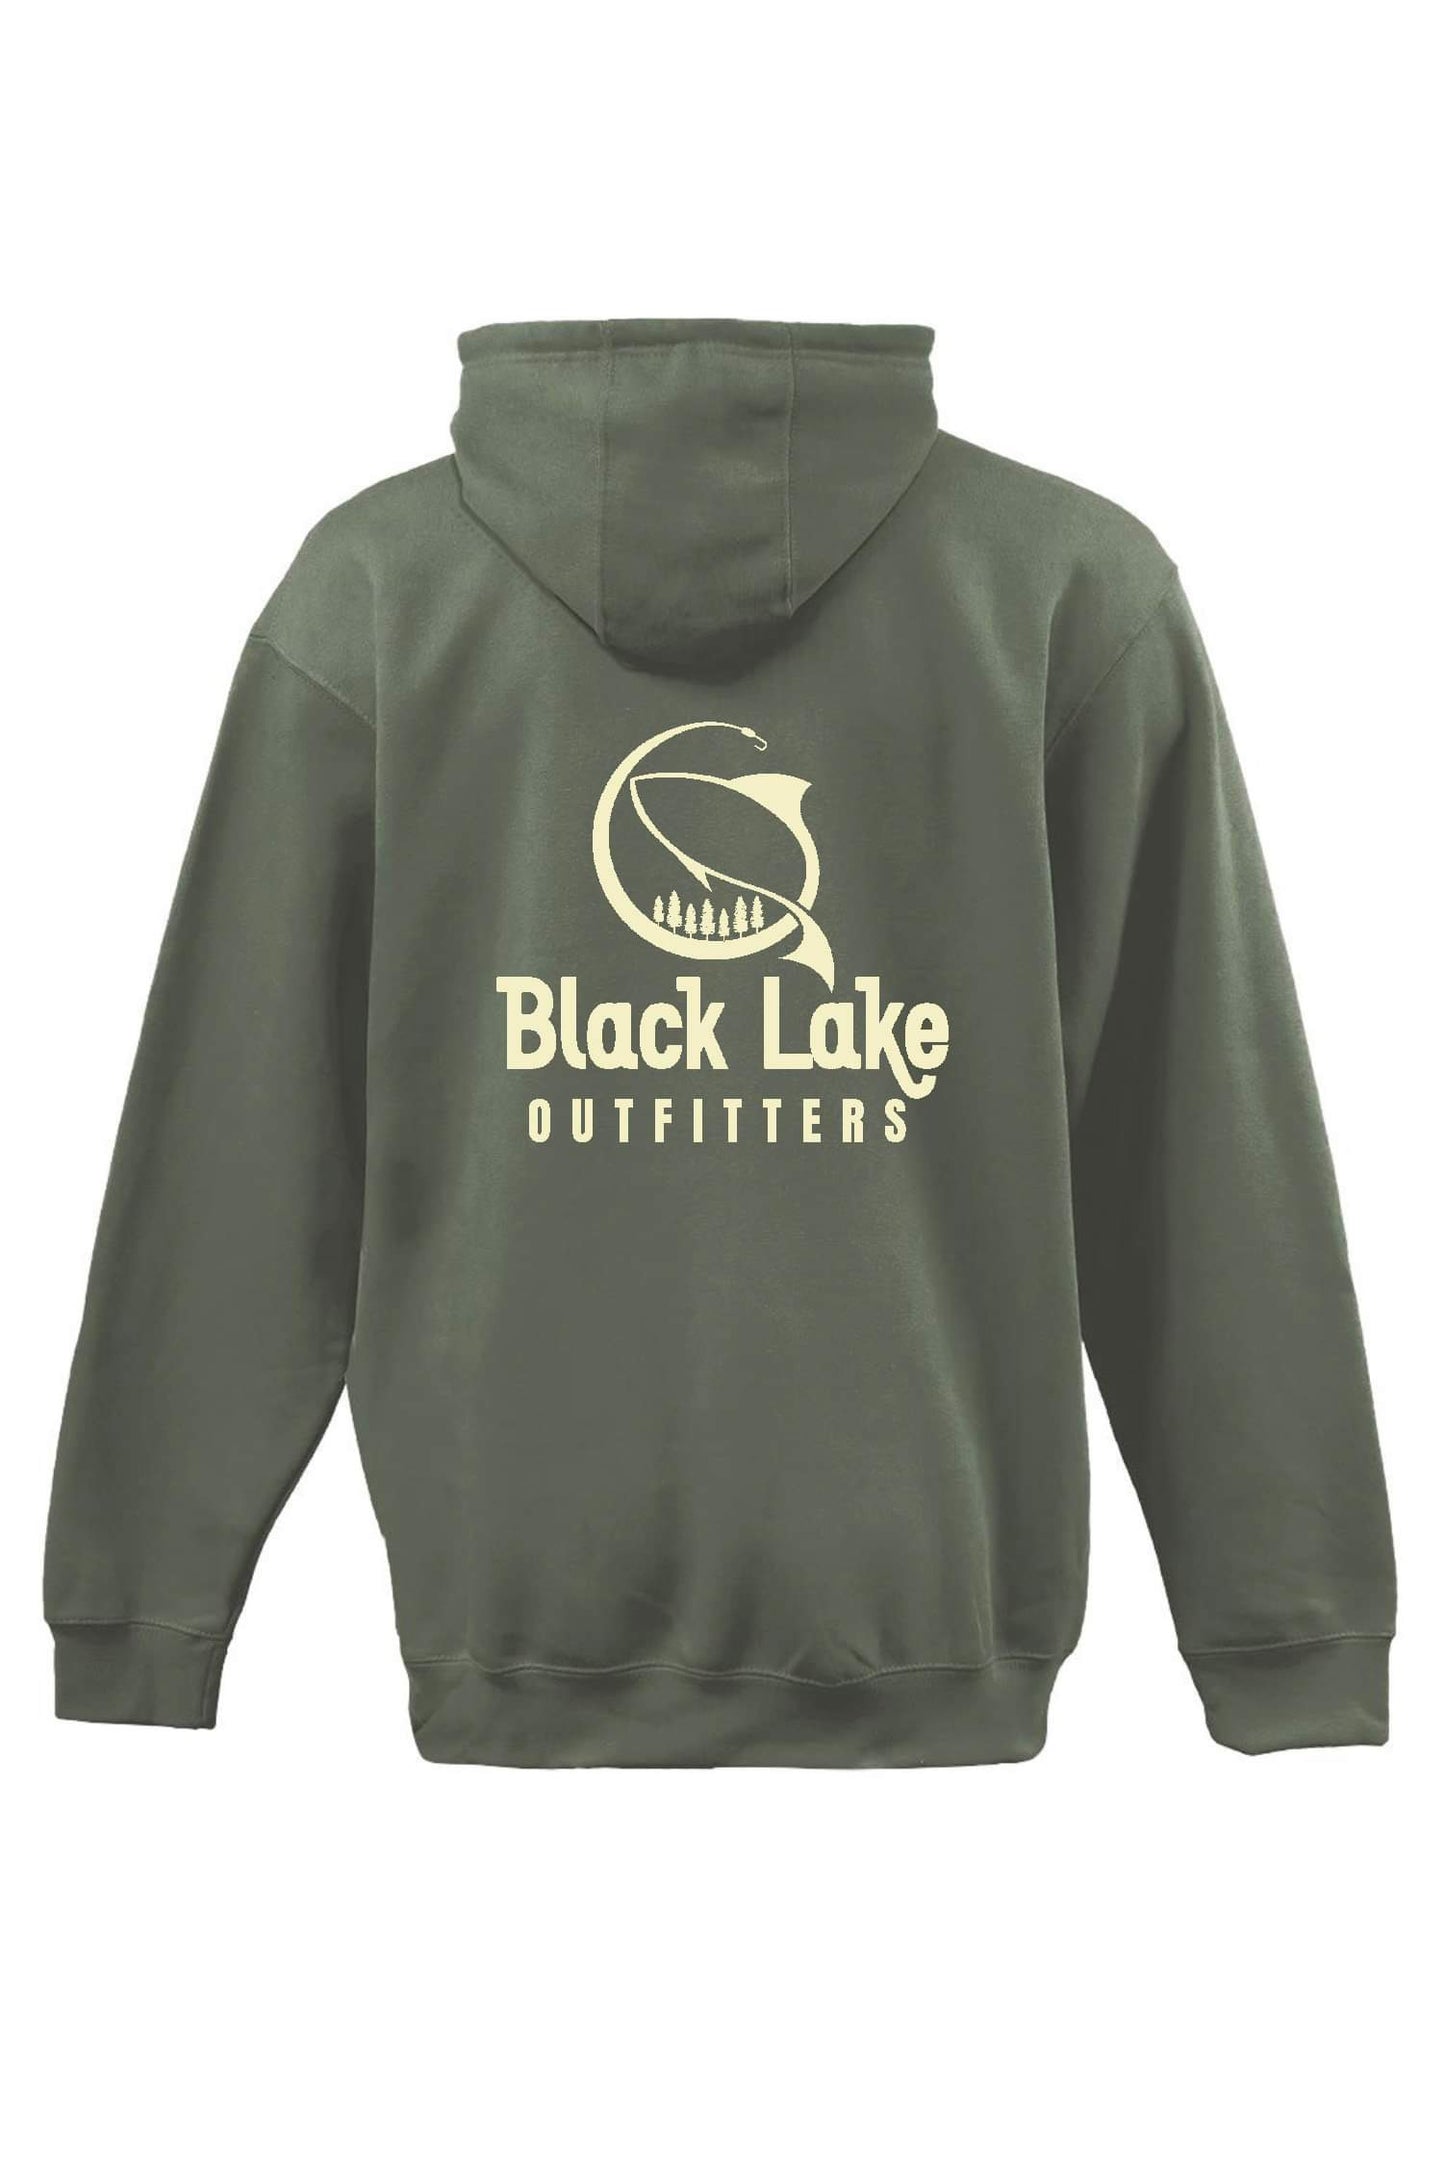 MEN'S HOODIE IN OLIVE GREEN WITH CREAM INK